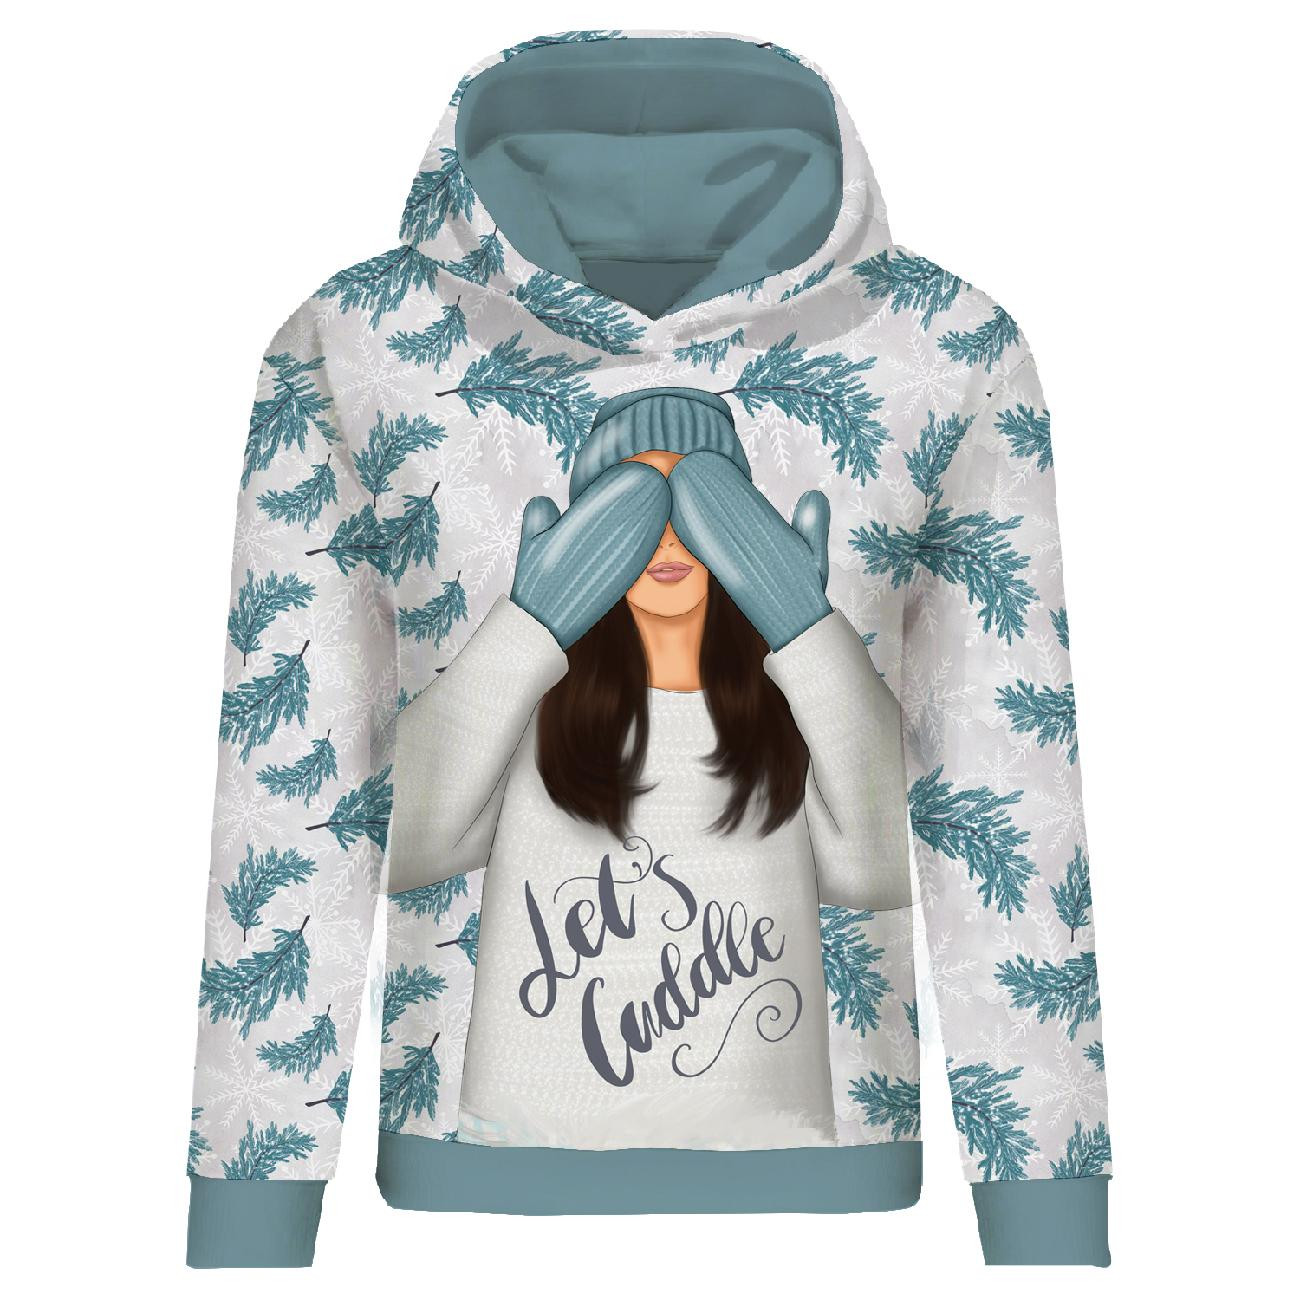 CLASSIC WOMEN’S HOODIE (POLA) - LET'S CUDDLE (WINTER IN THE CITY) - looped knit fabric 